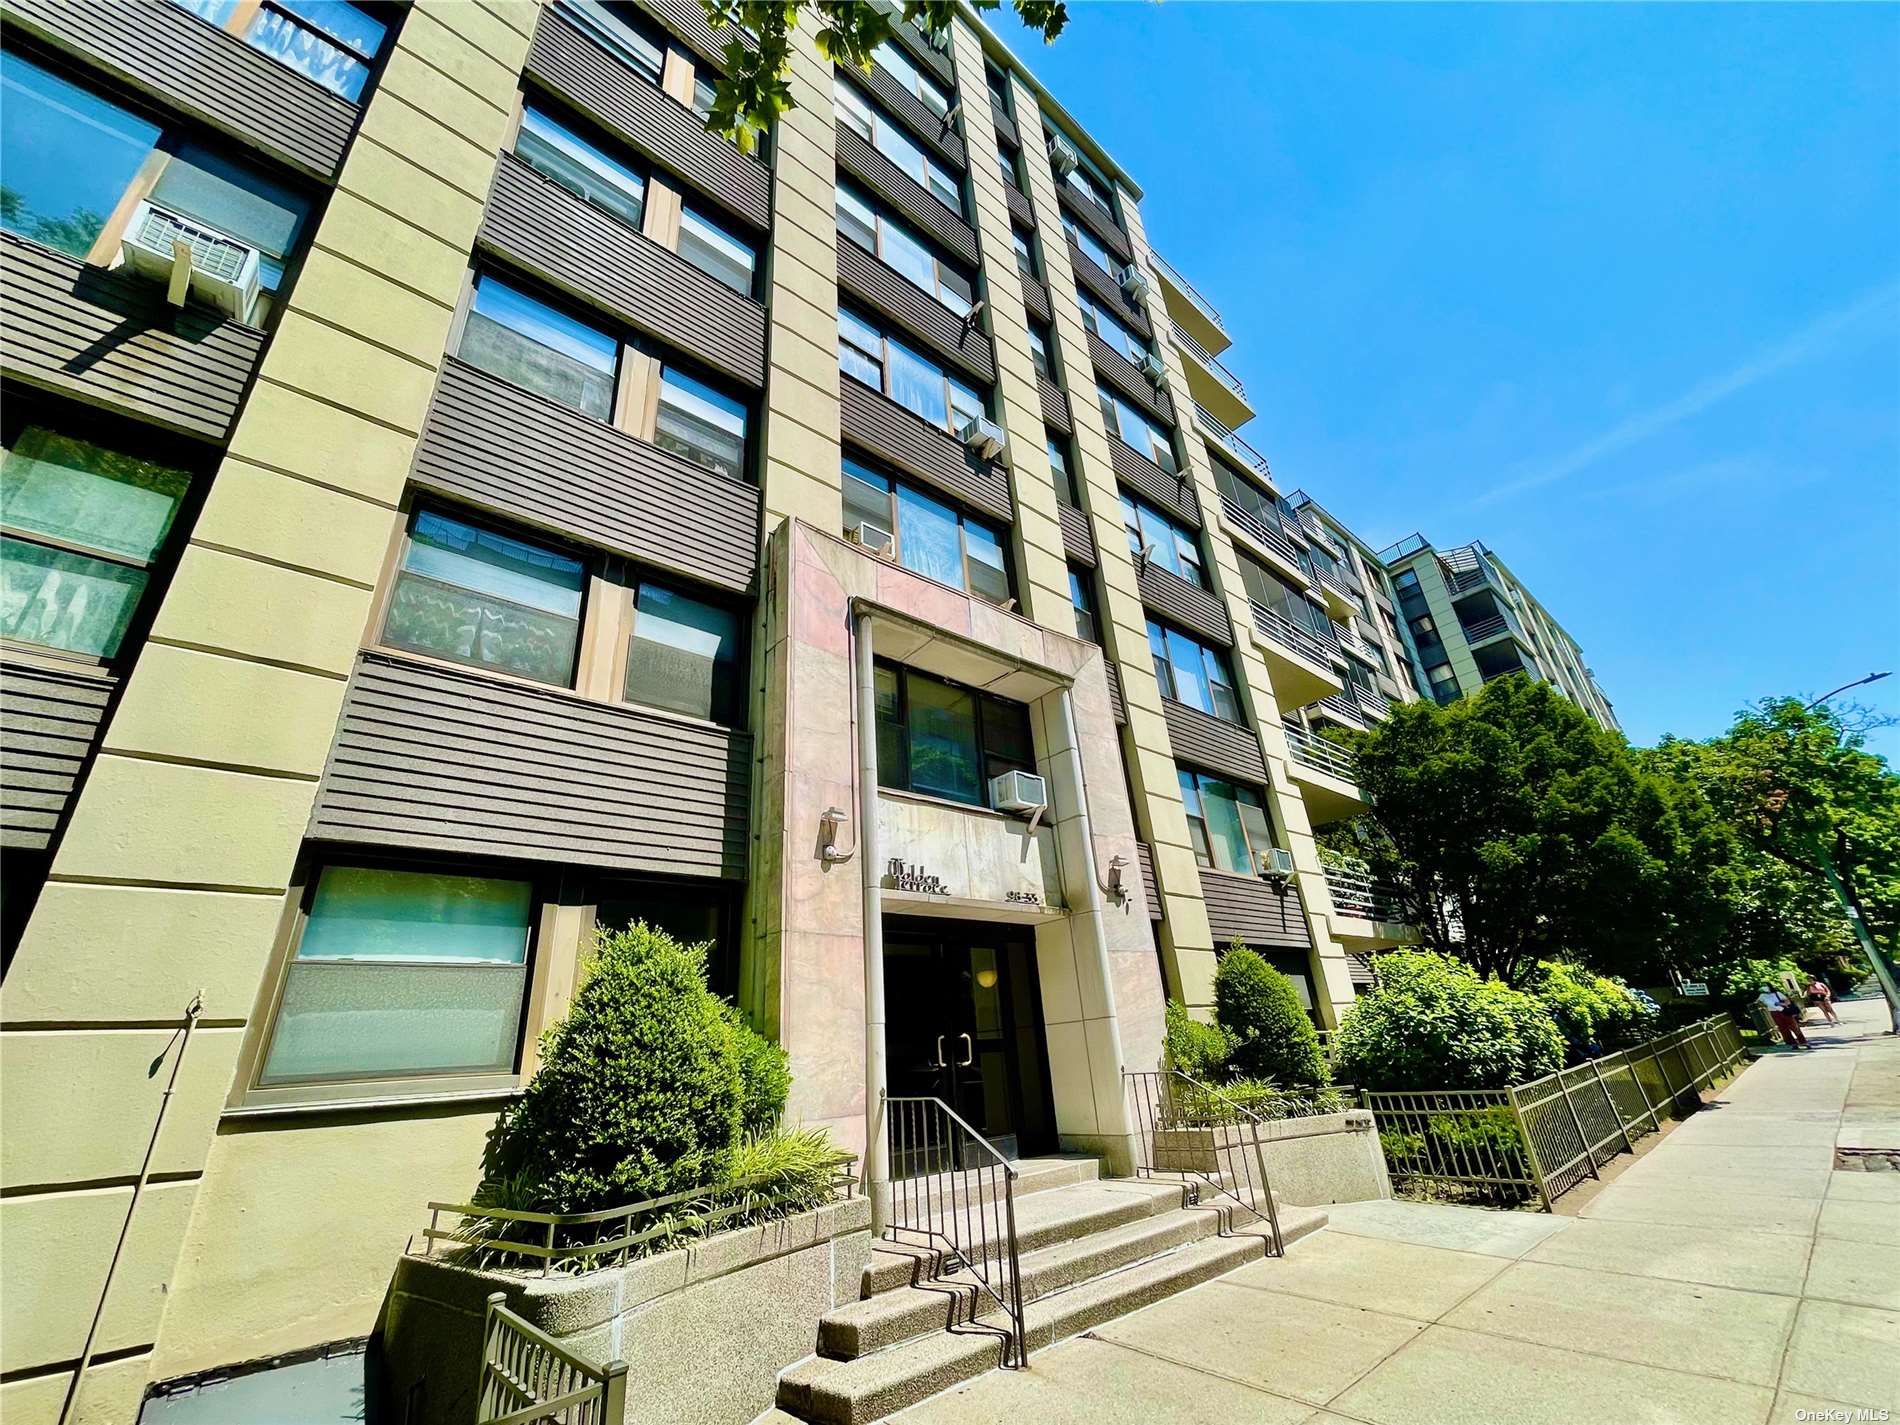 View Rego Park, NY 11374 co-op property